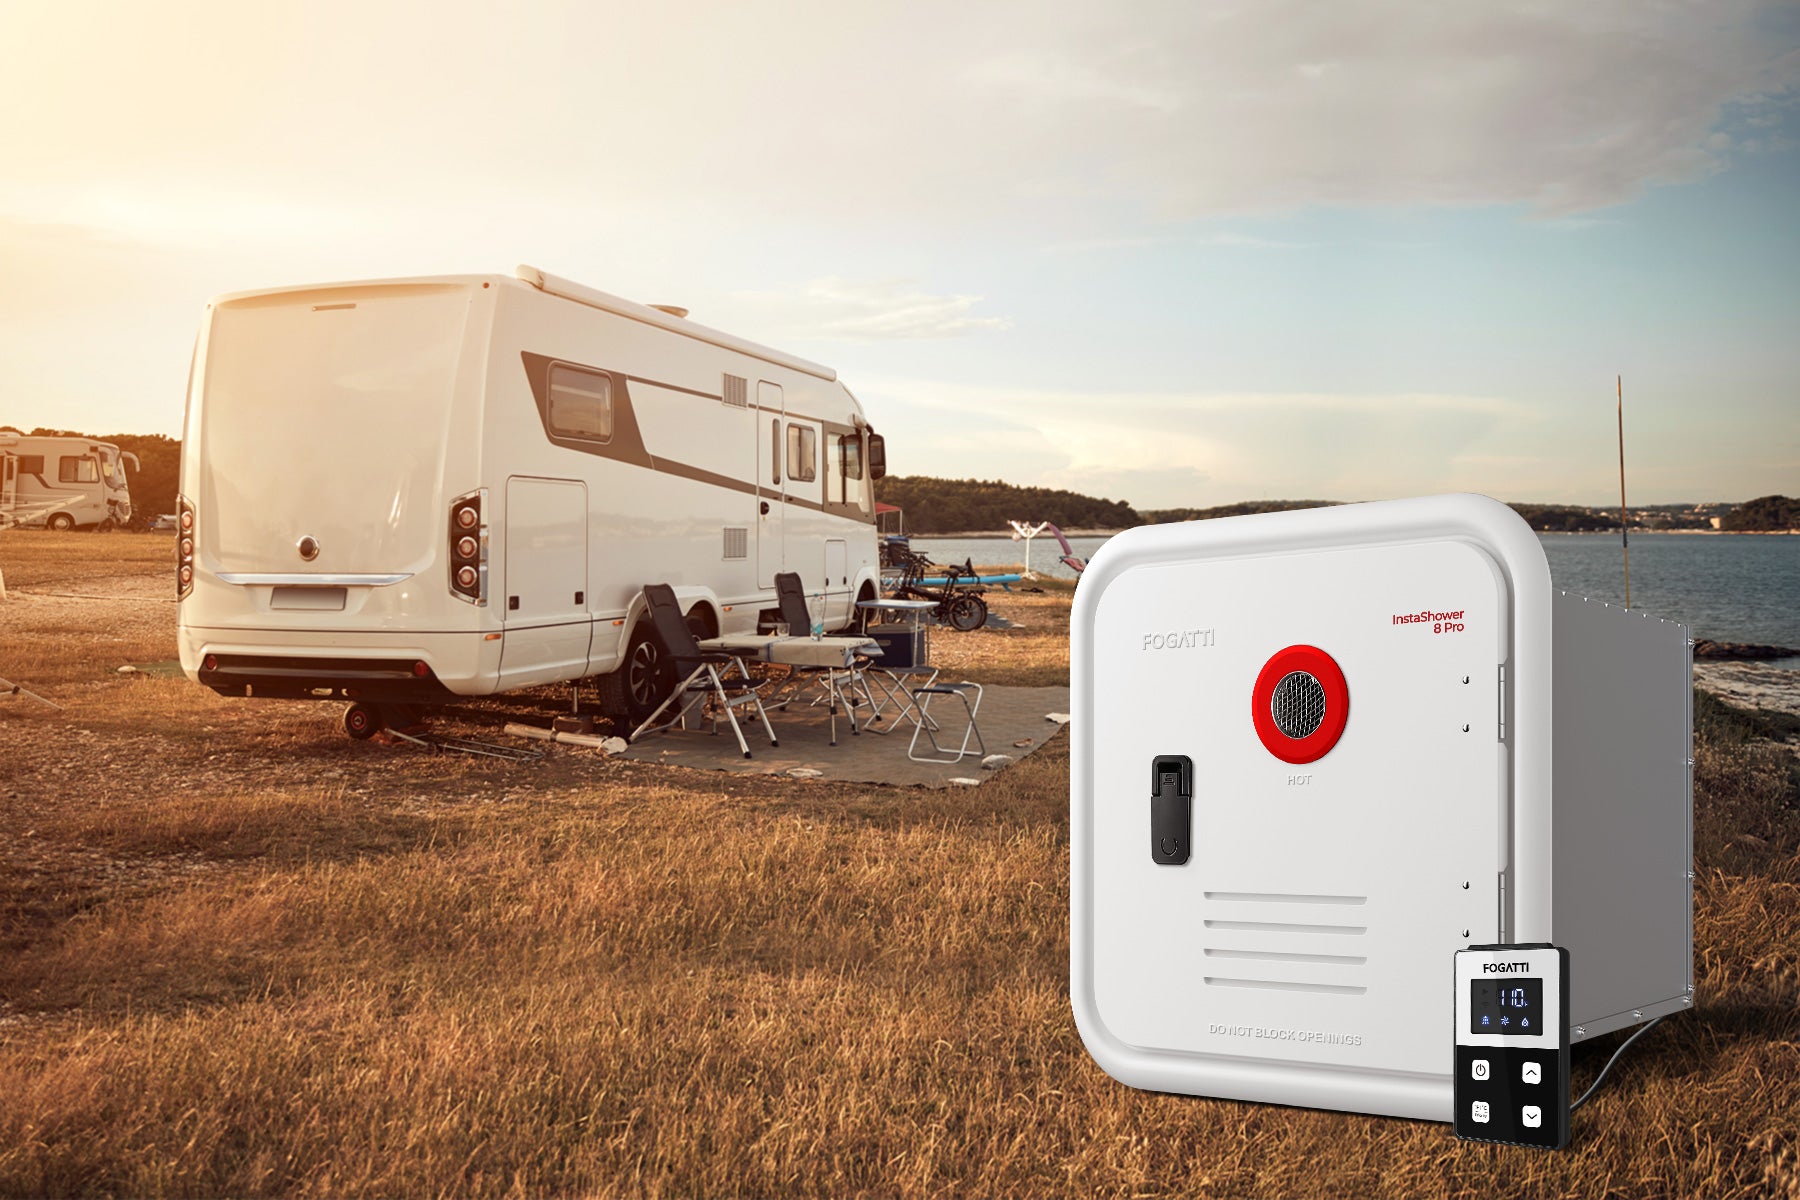 Best RV Tankless Water Heater for Your Camper: Introducing the Fogatti Models